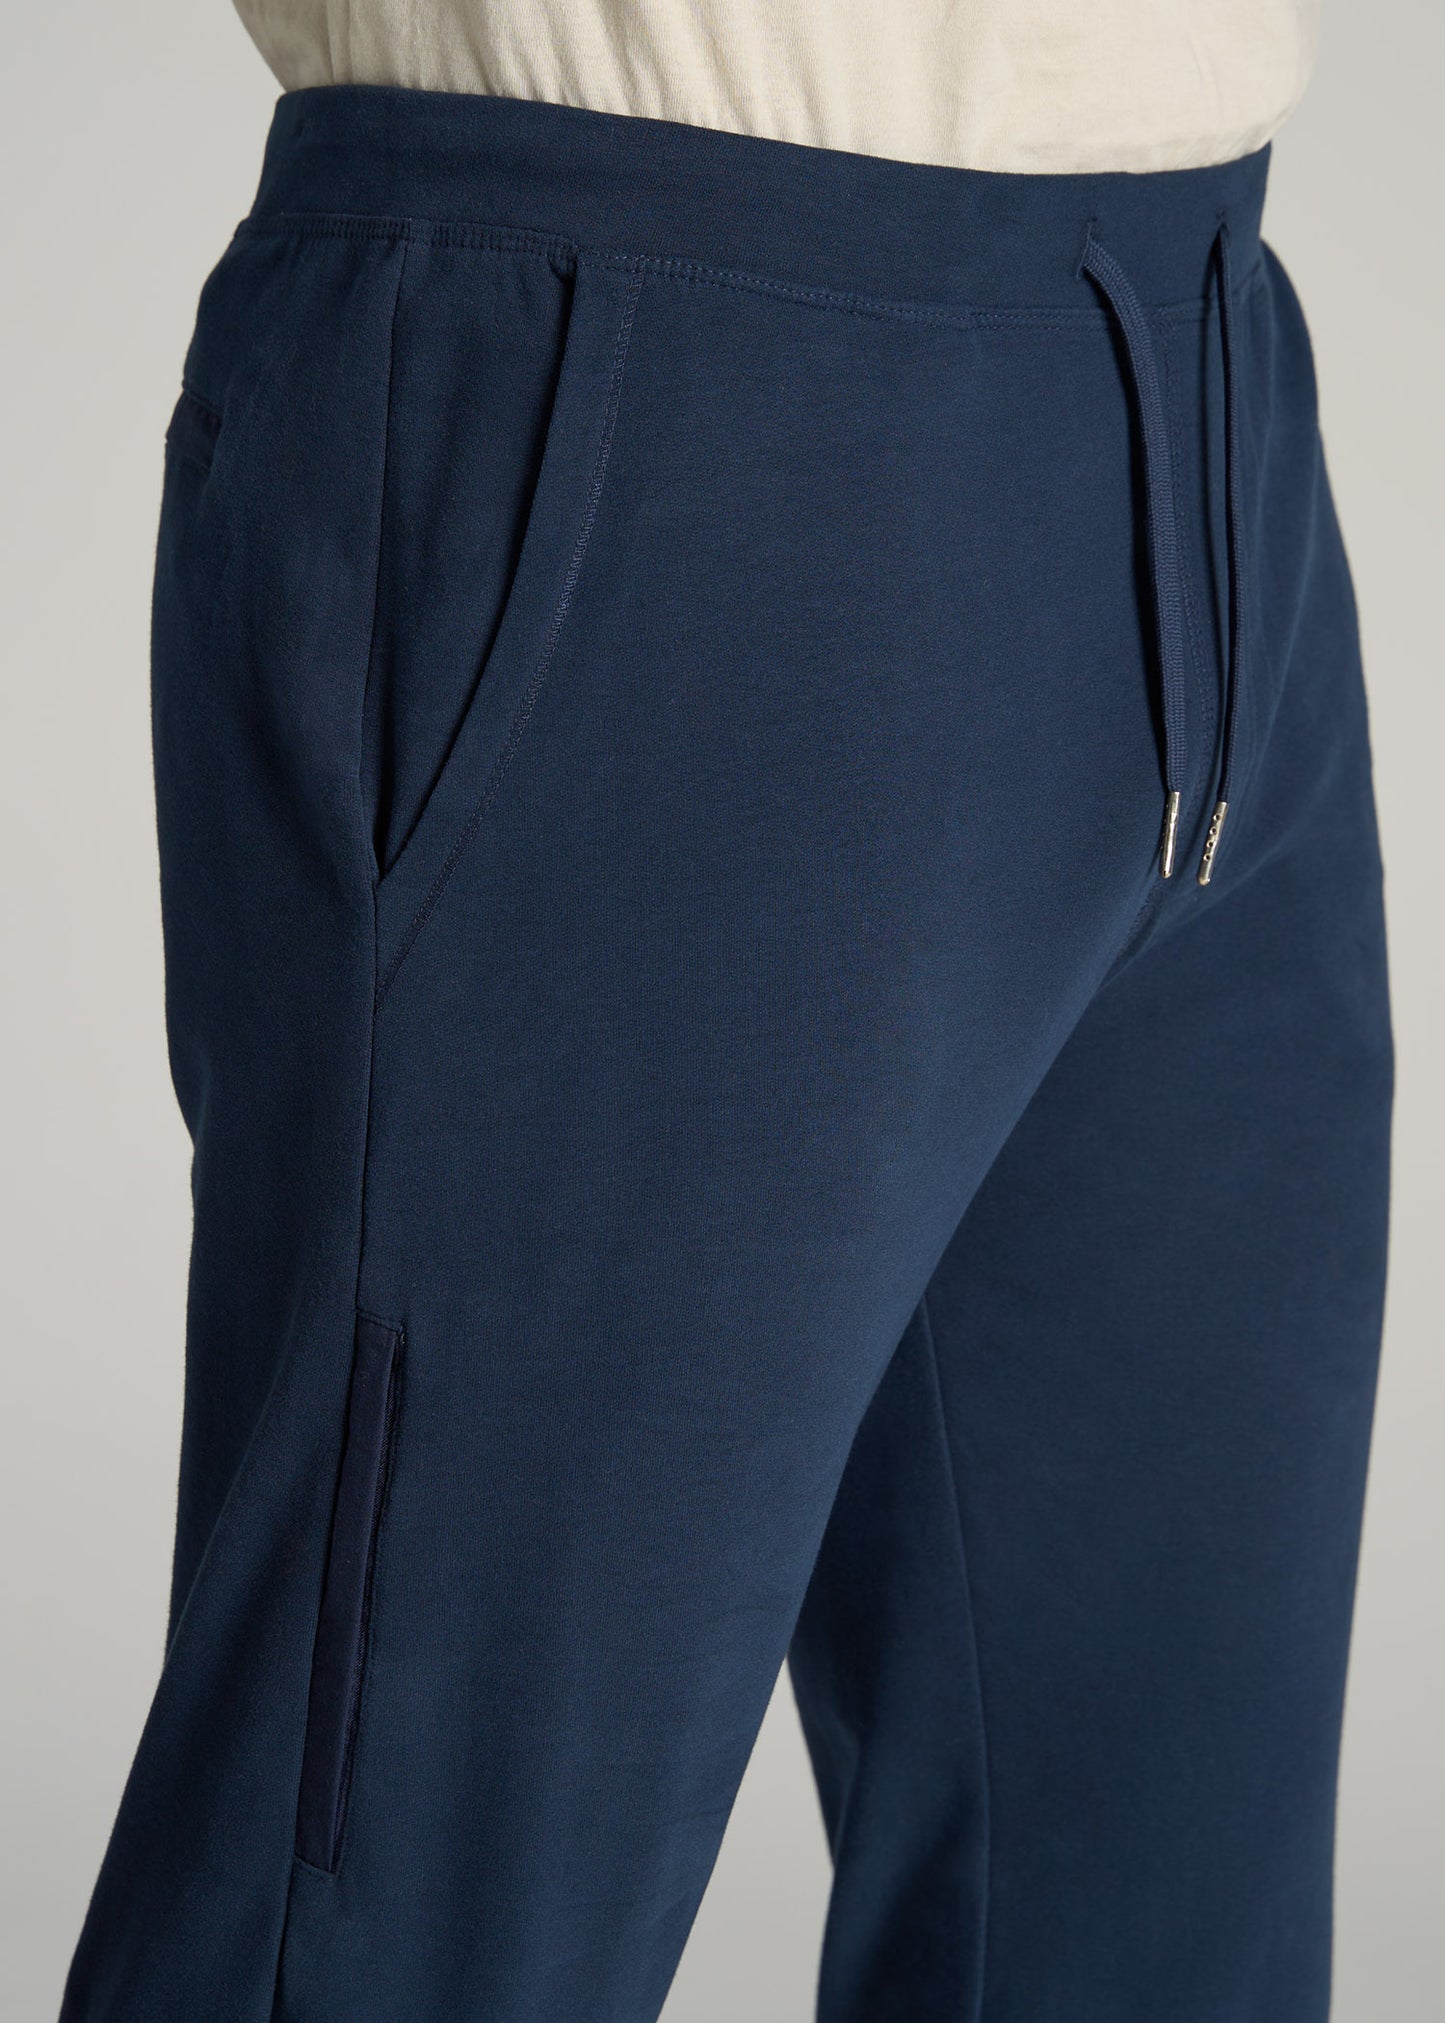       American-Tall-Men-Microsanded-French-Terry-Sweatpant-Marine-Navy-detail